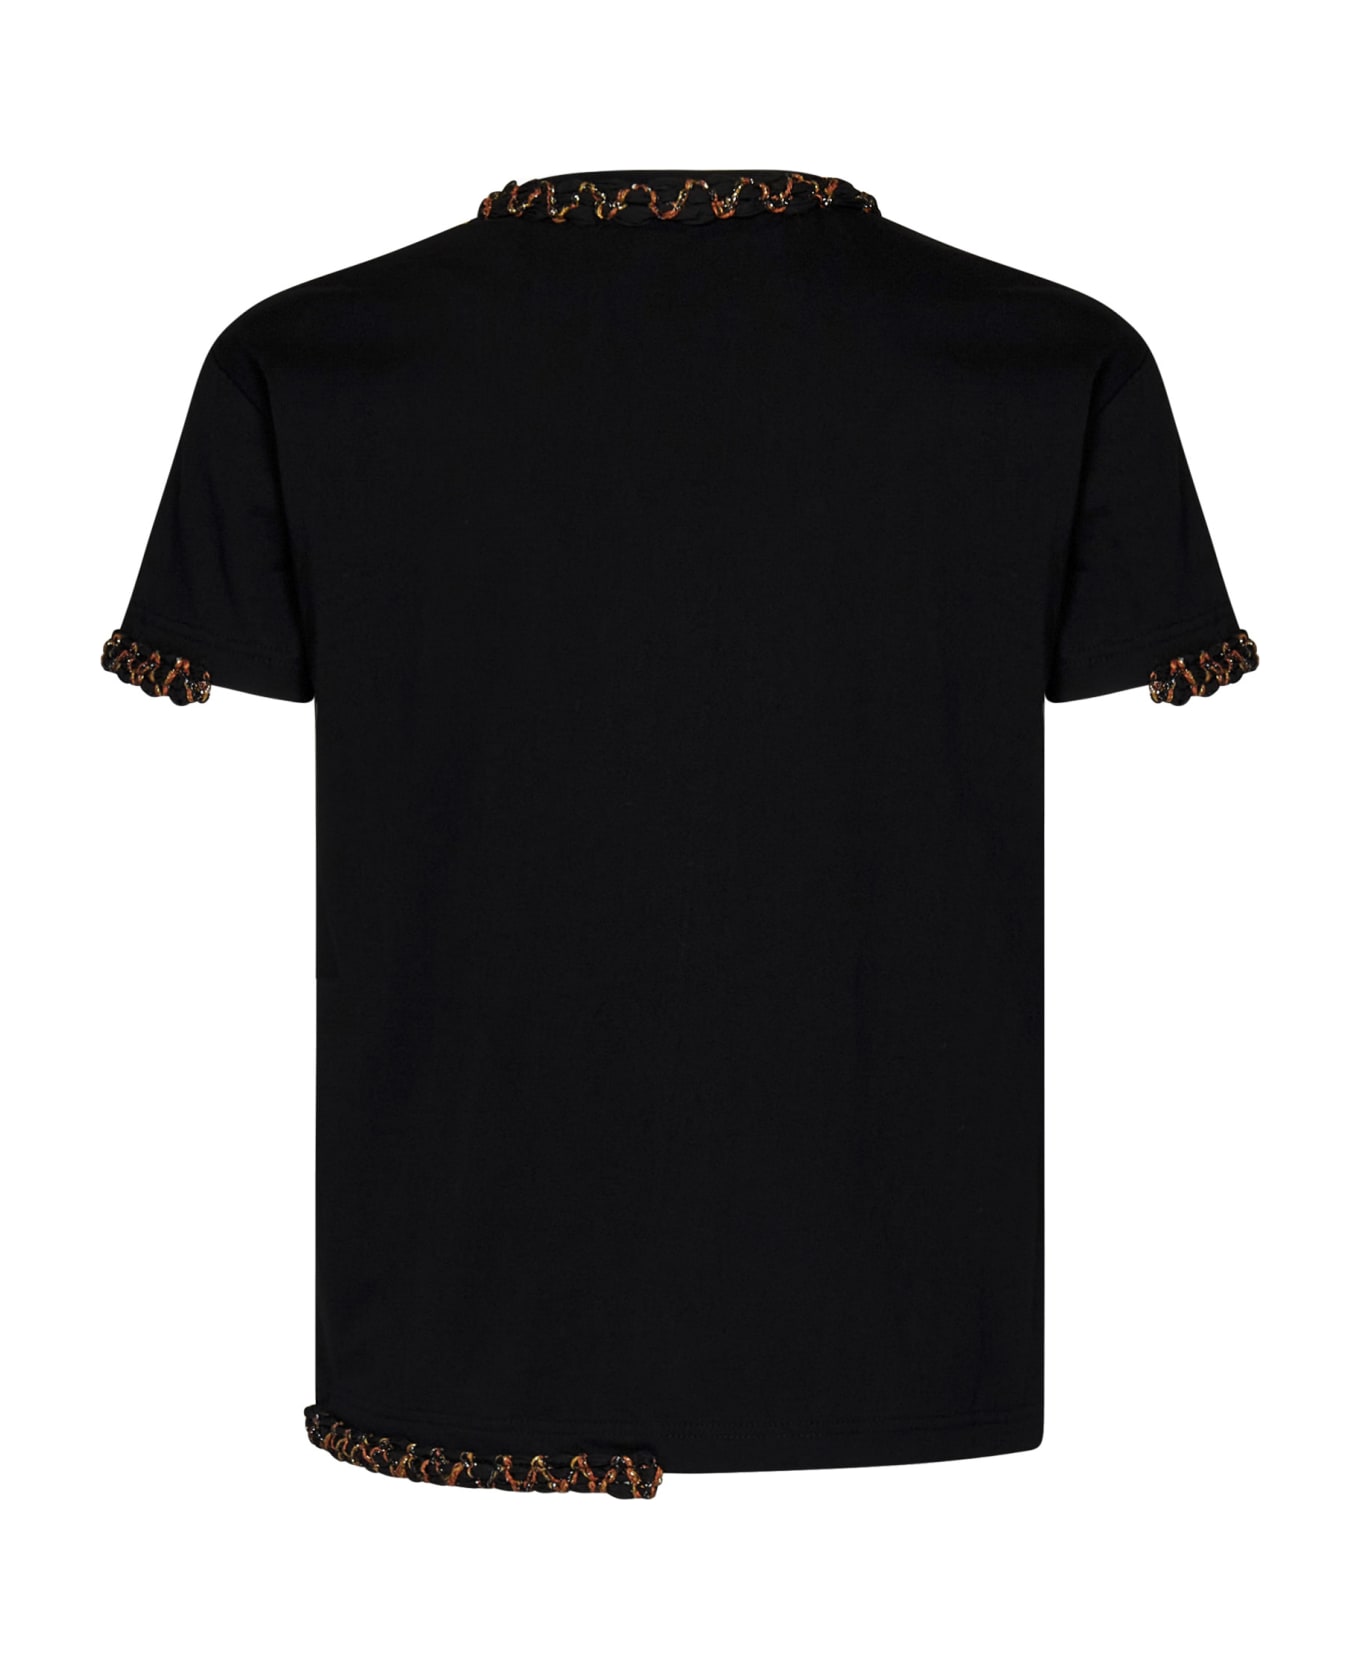 Andersson Bell T-shirt - Black シャツ